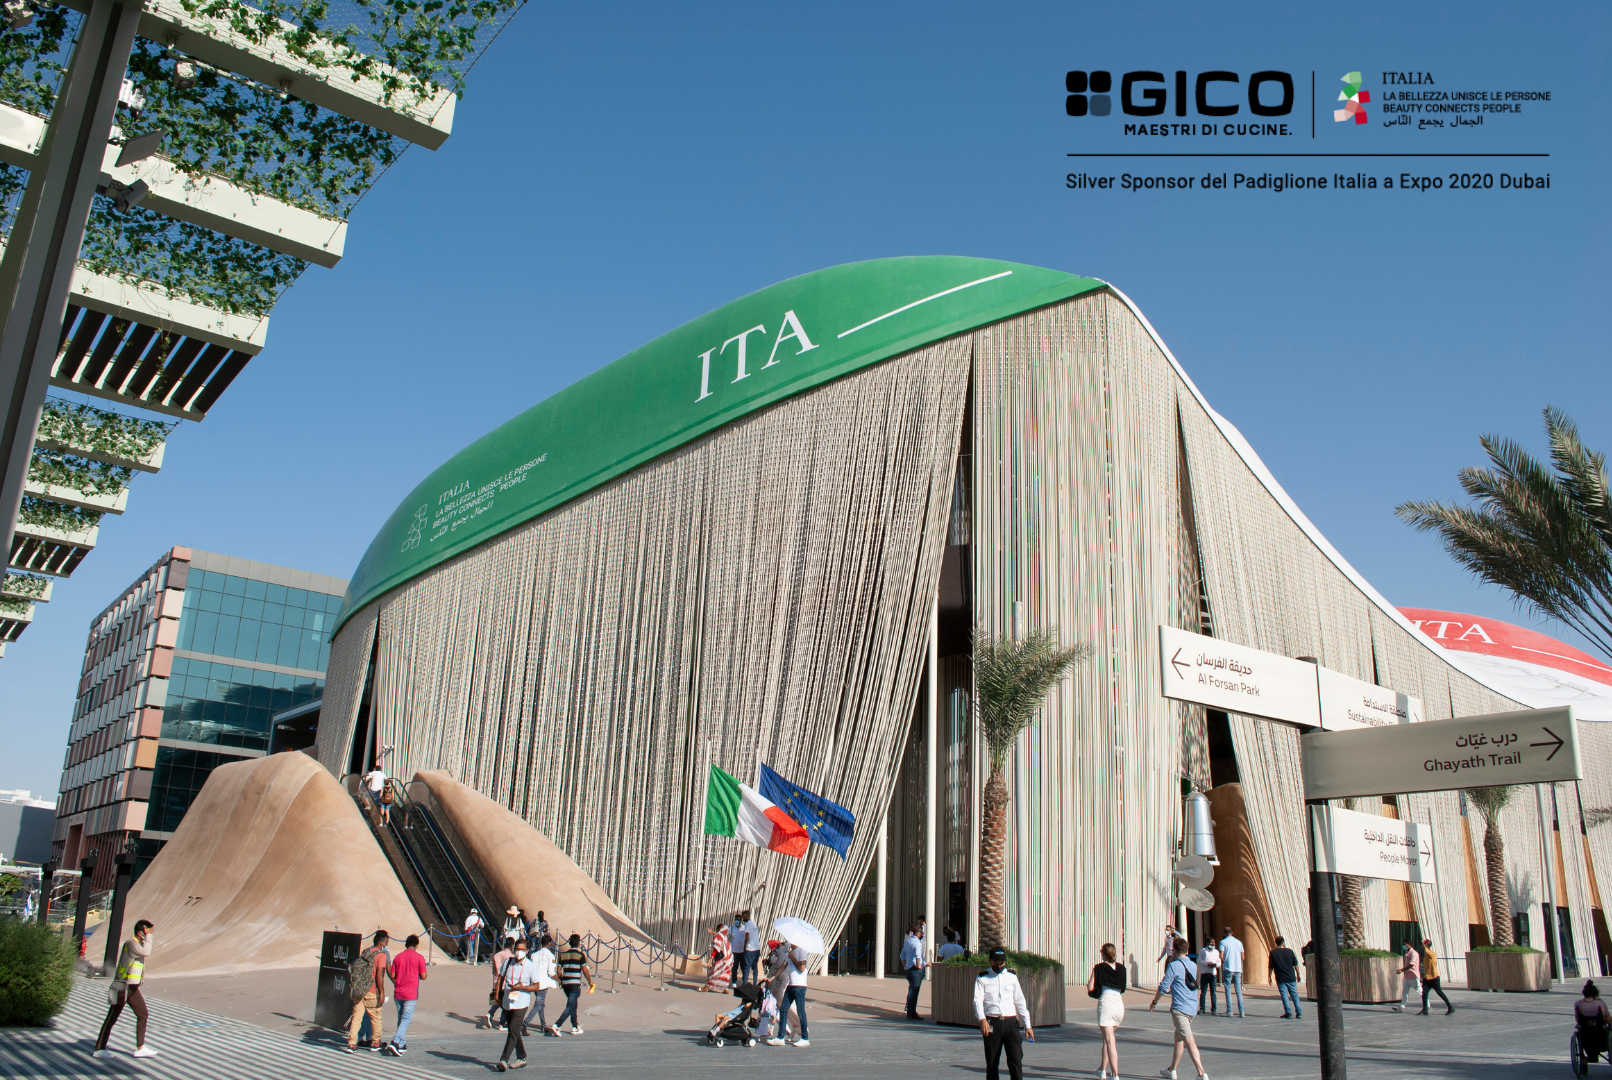 LIVE from Expo Dubai 2020 </br> A visit to the Italian Pavilion